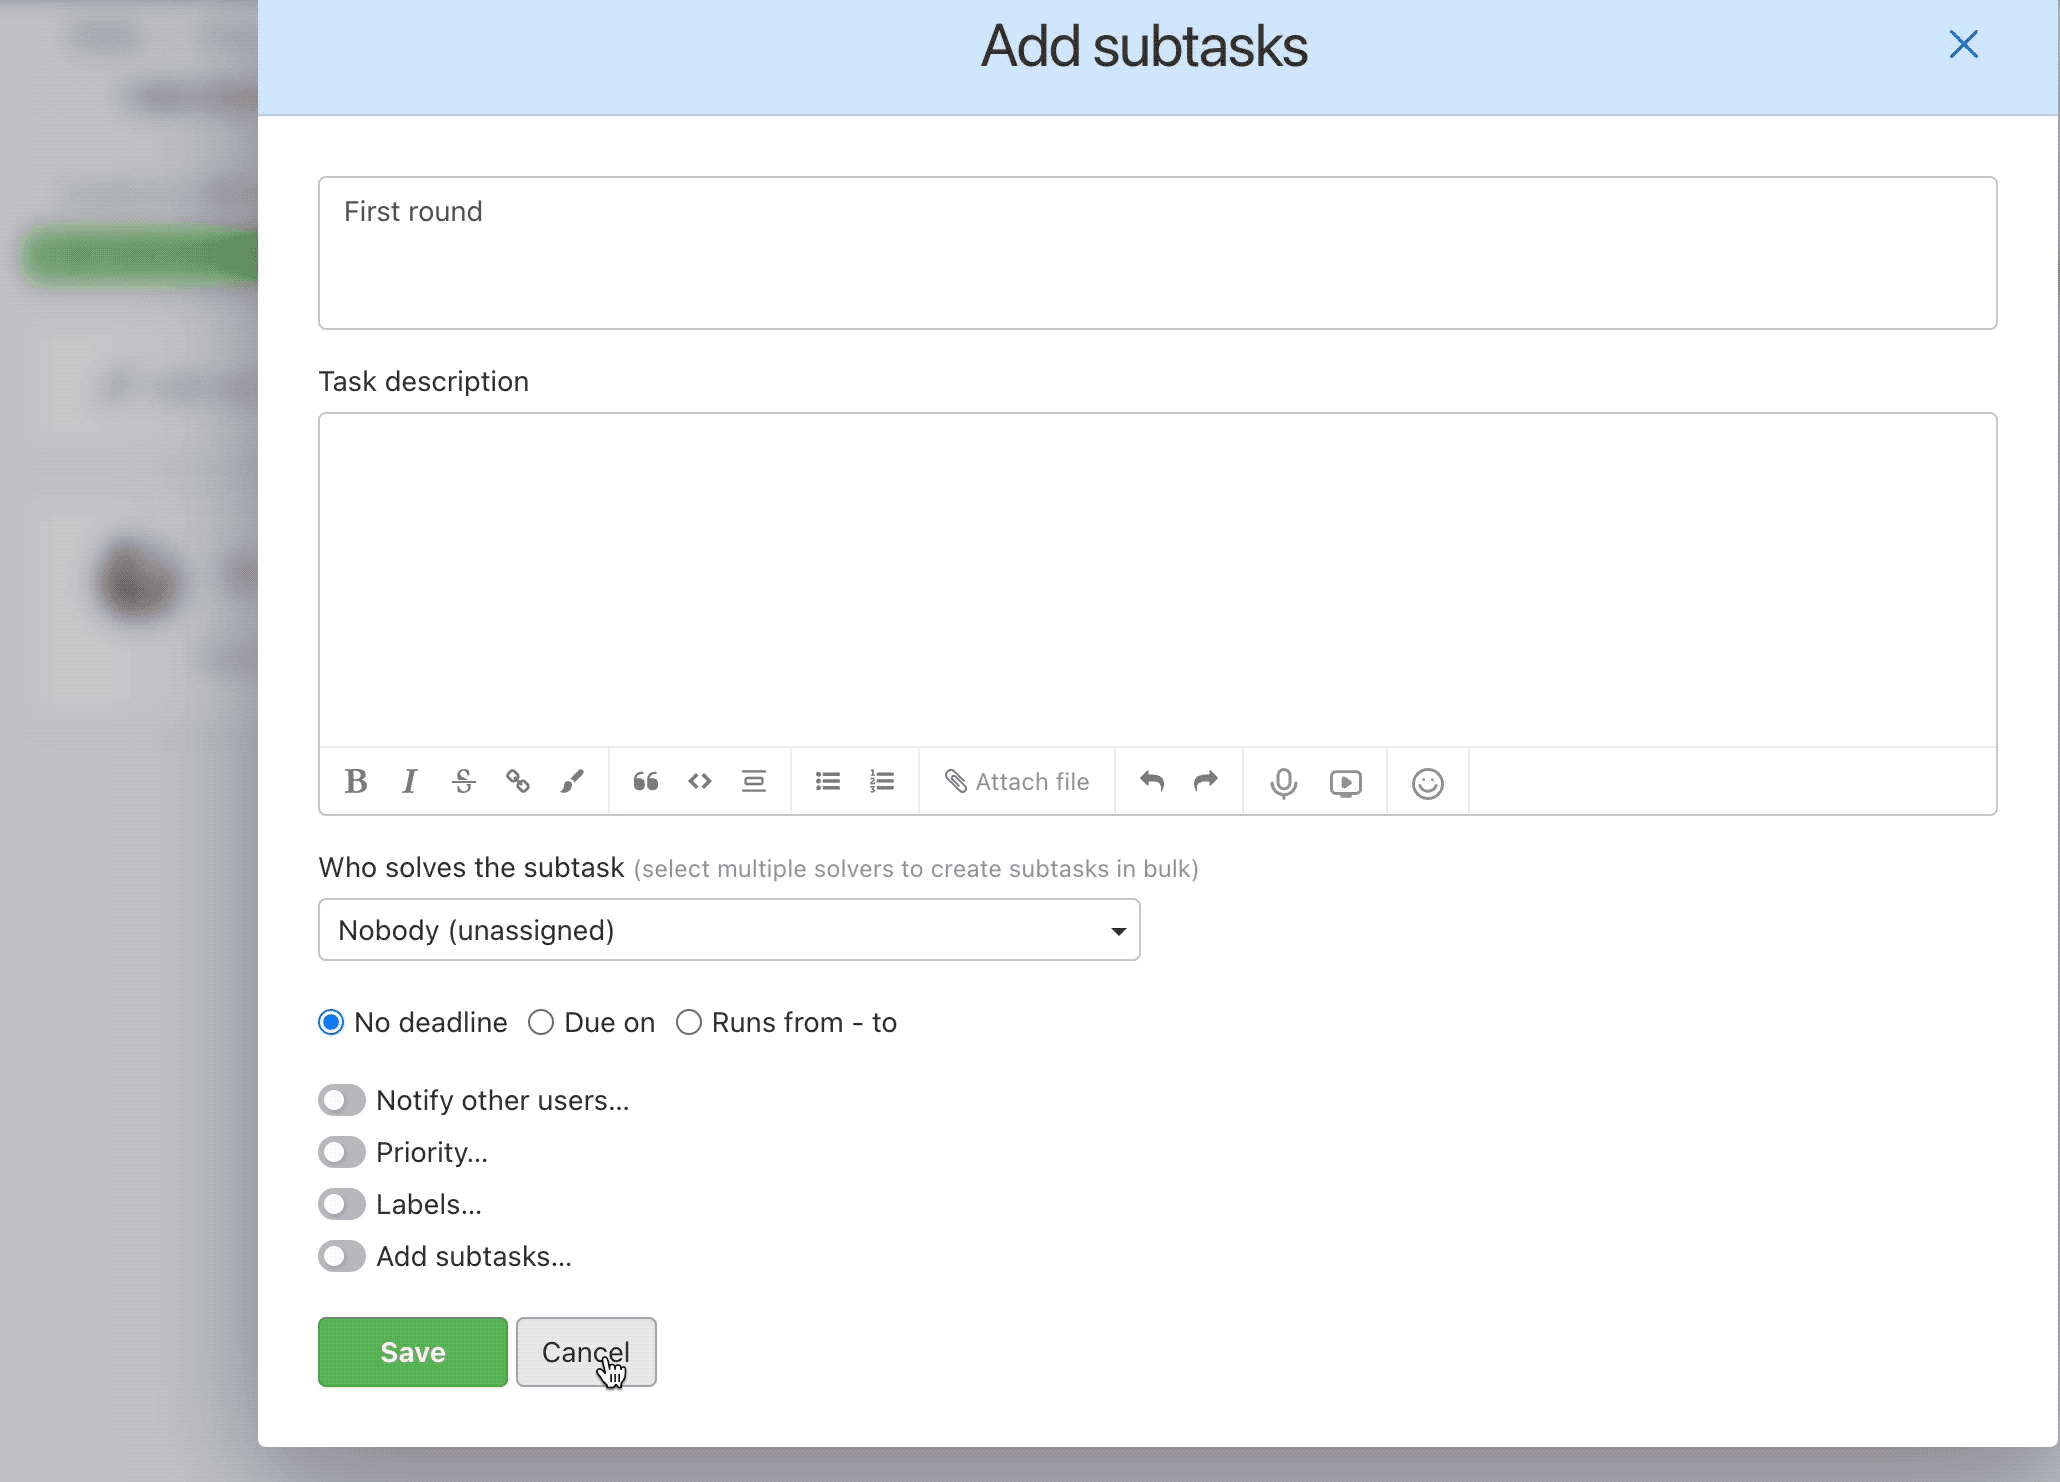 GIF showing how easy it is to create more subtasks simultaneously for each member of the team, in this case HR.